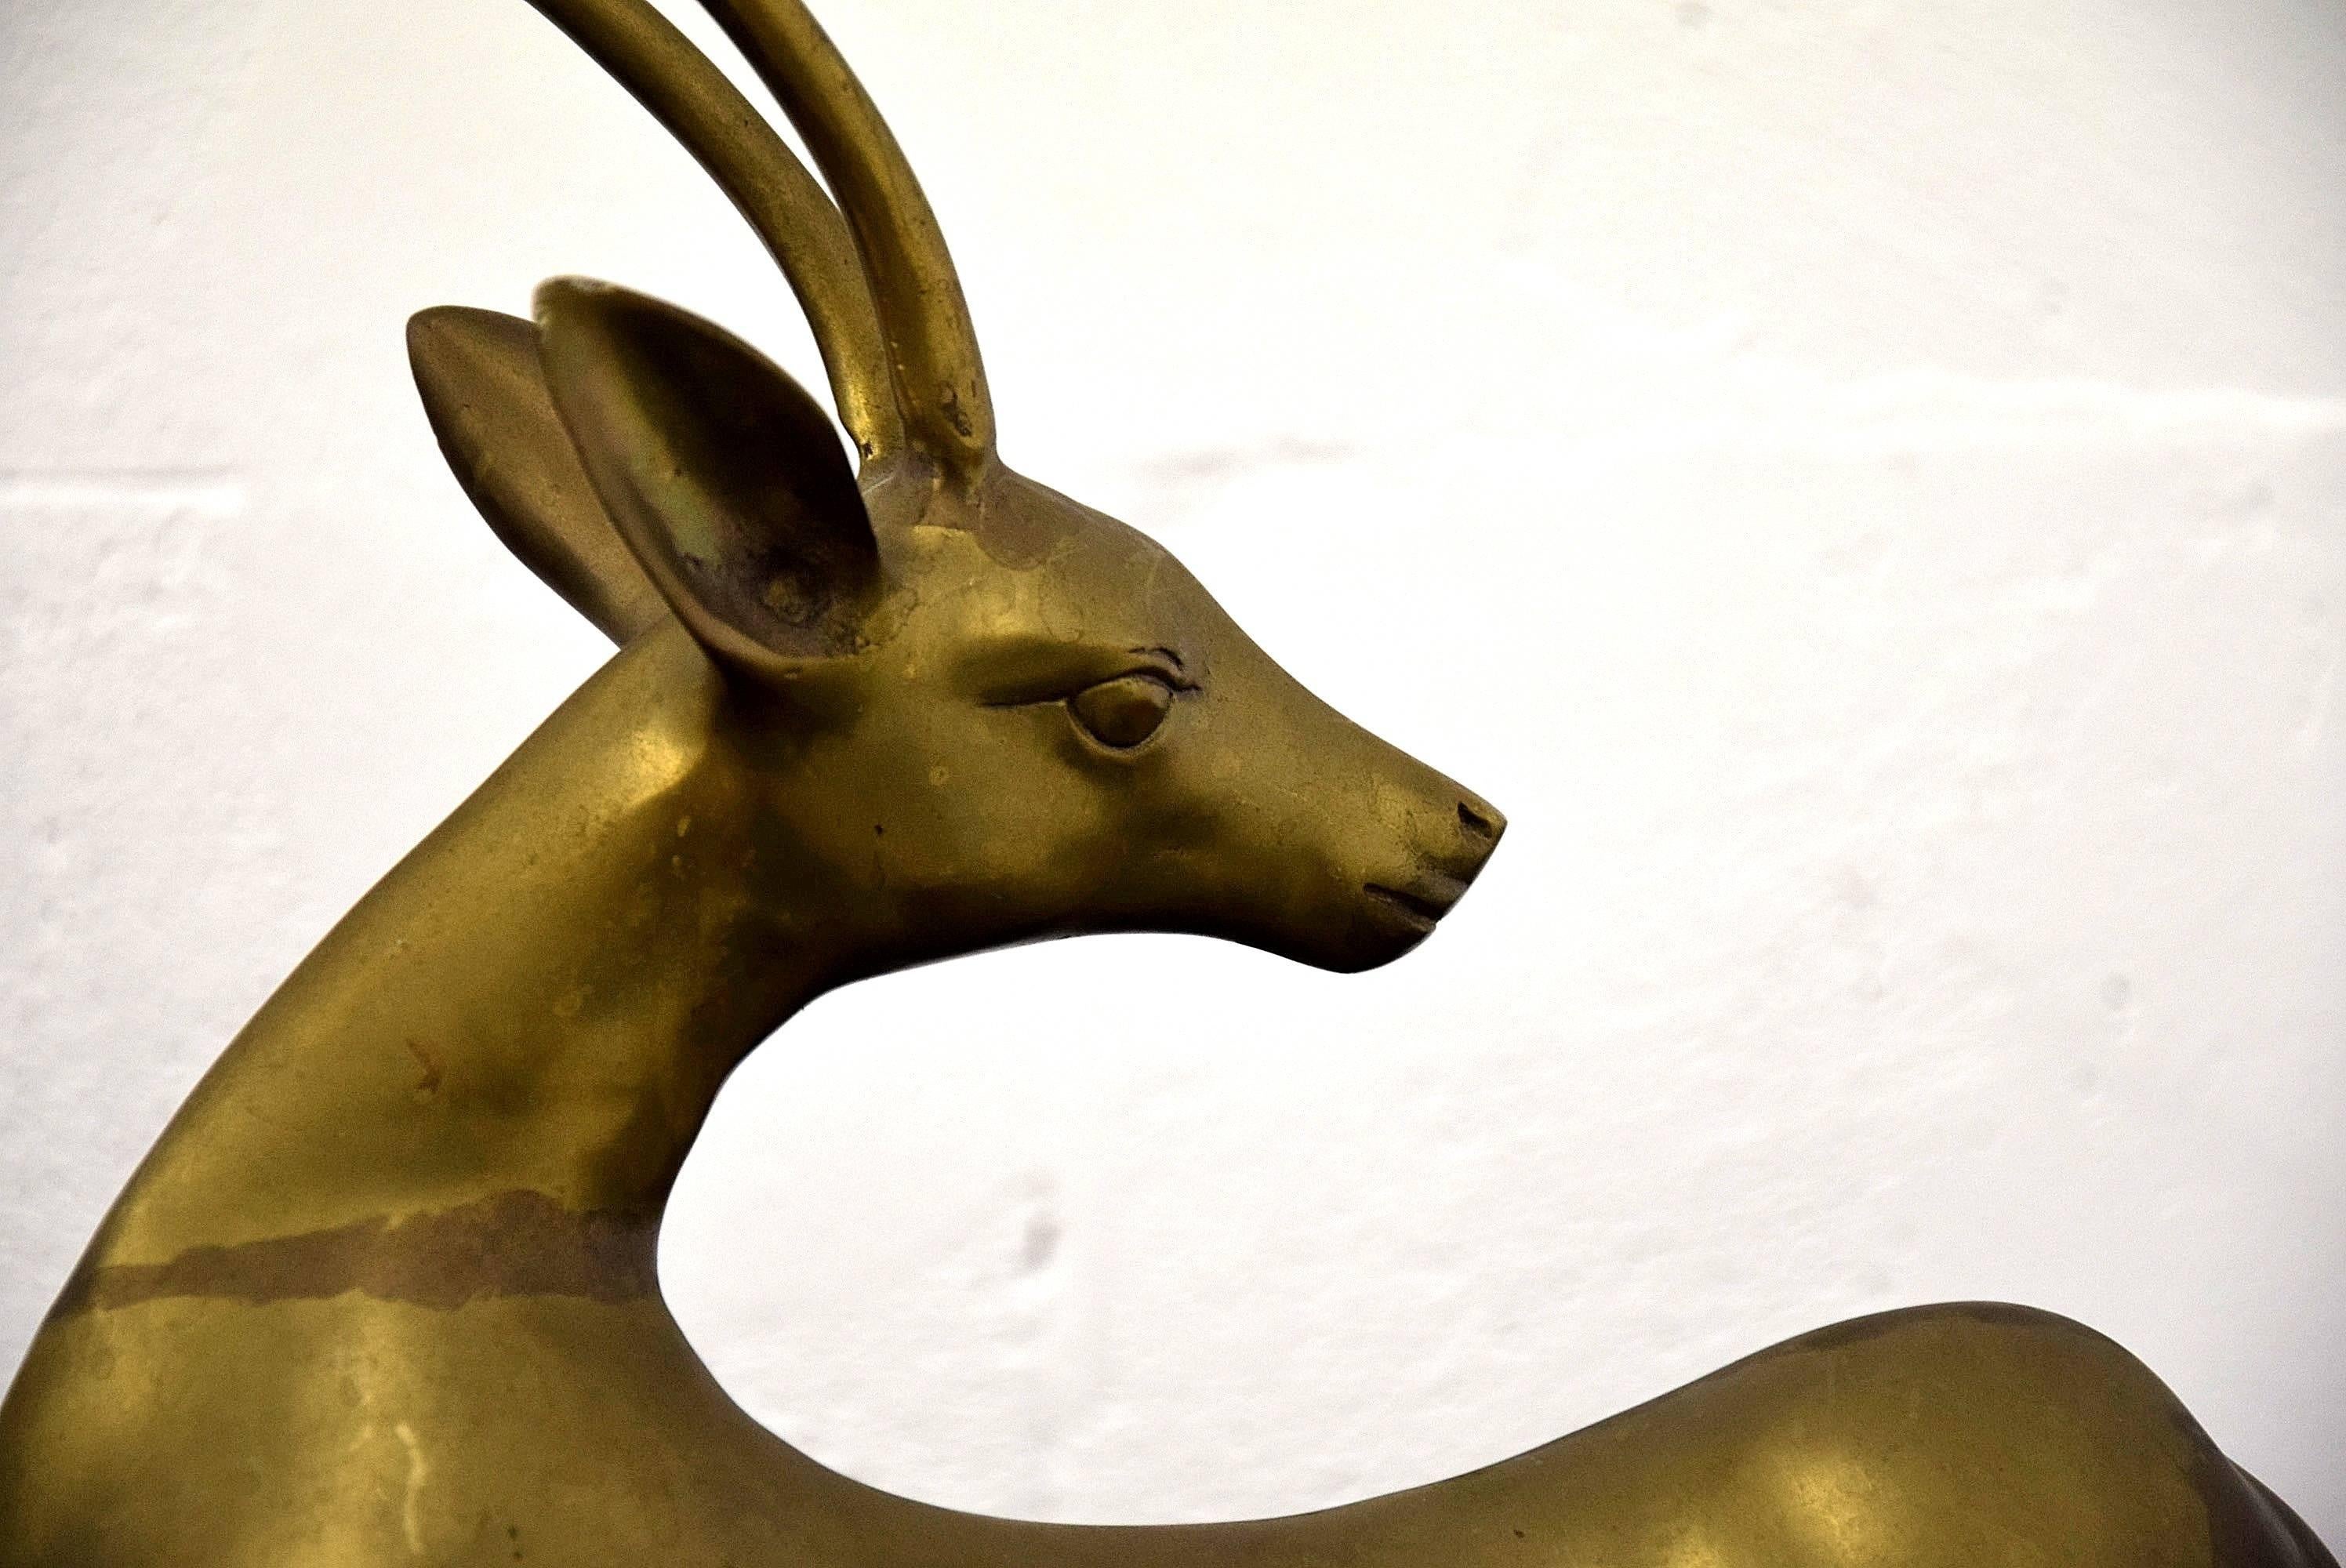 Beautiful 1960s French antelope sculpture very much in the style of Maison Jansen.

Maison Jansen (House of Jansen) was a Paris-based interior decoration office founded in 1880 by Dutch-born Jean-Henri Jansen. Jansen is considered the first truly